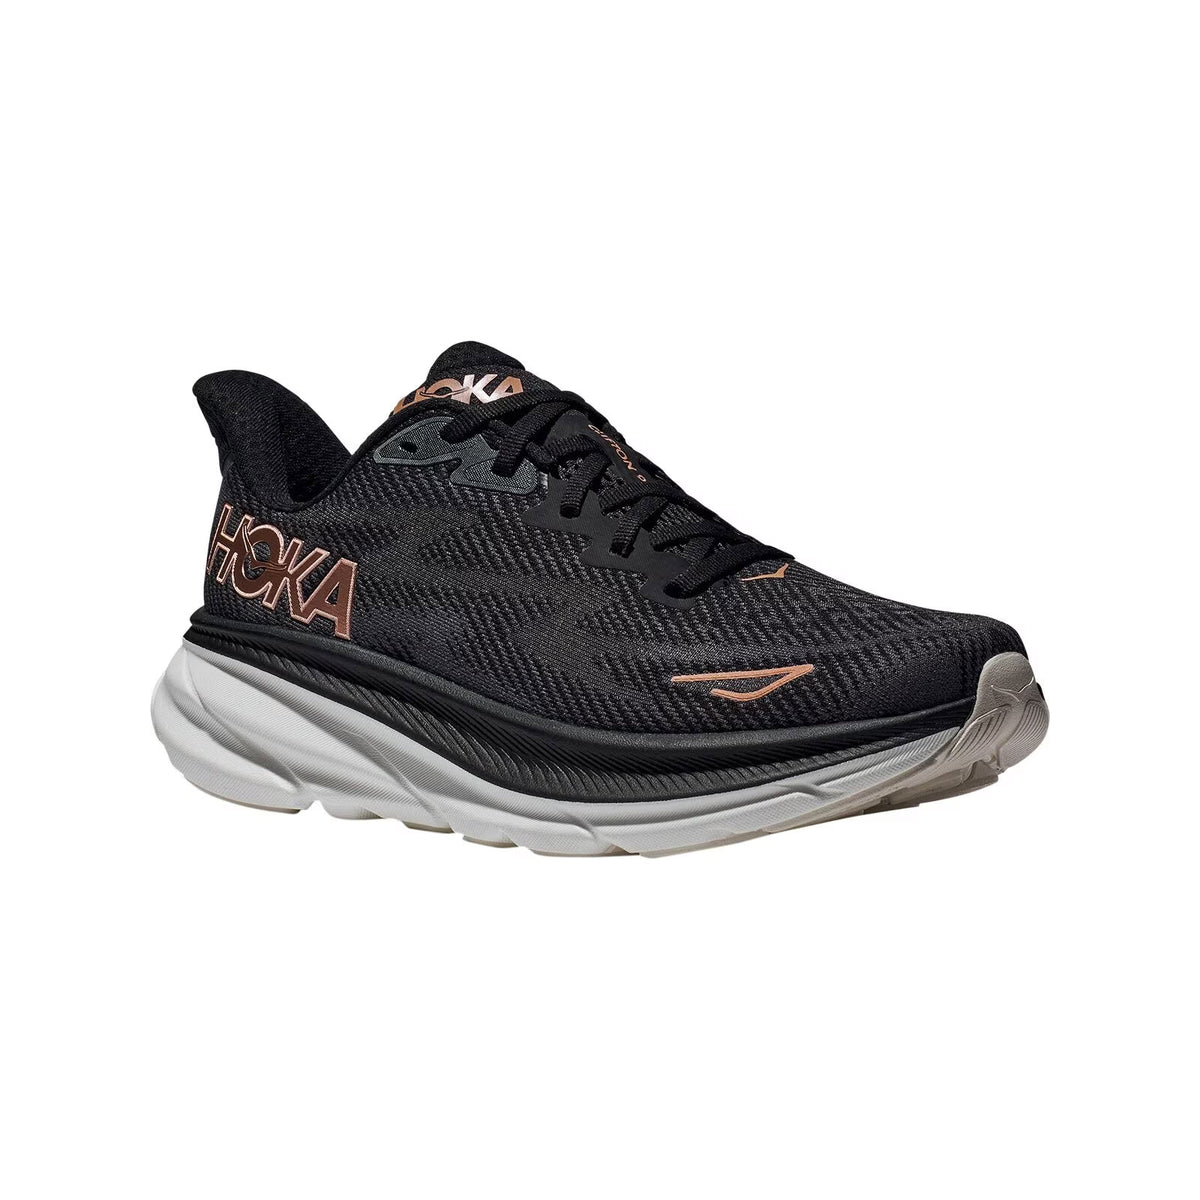 A HOKA CLIFTON 9 black and gray running shoe with a white sole, featuring the Hoka logo in copper on the side.